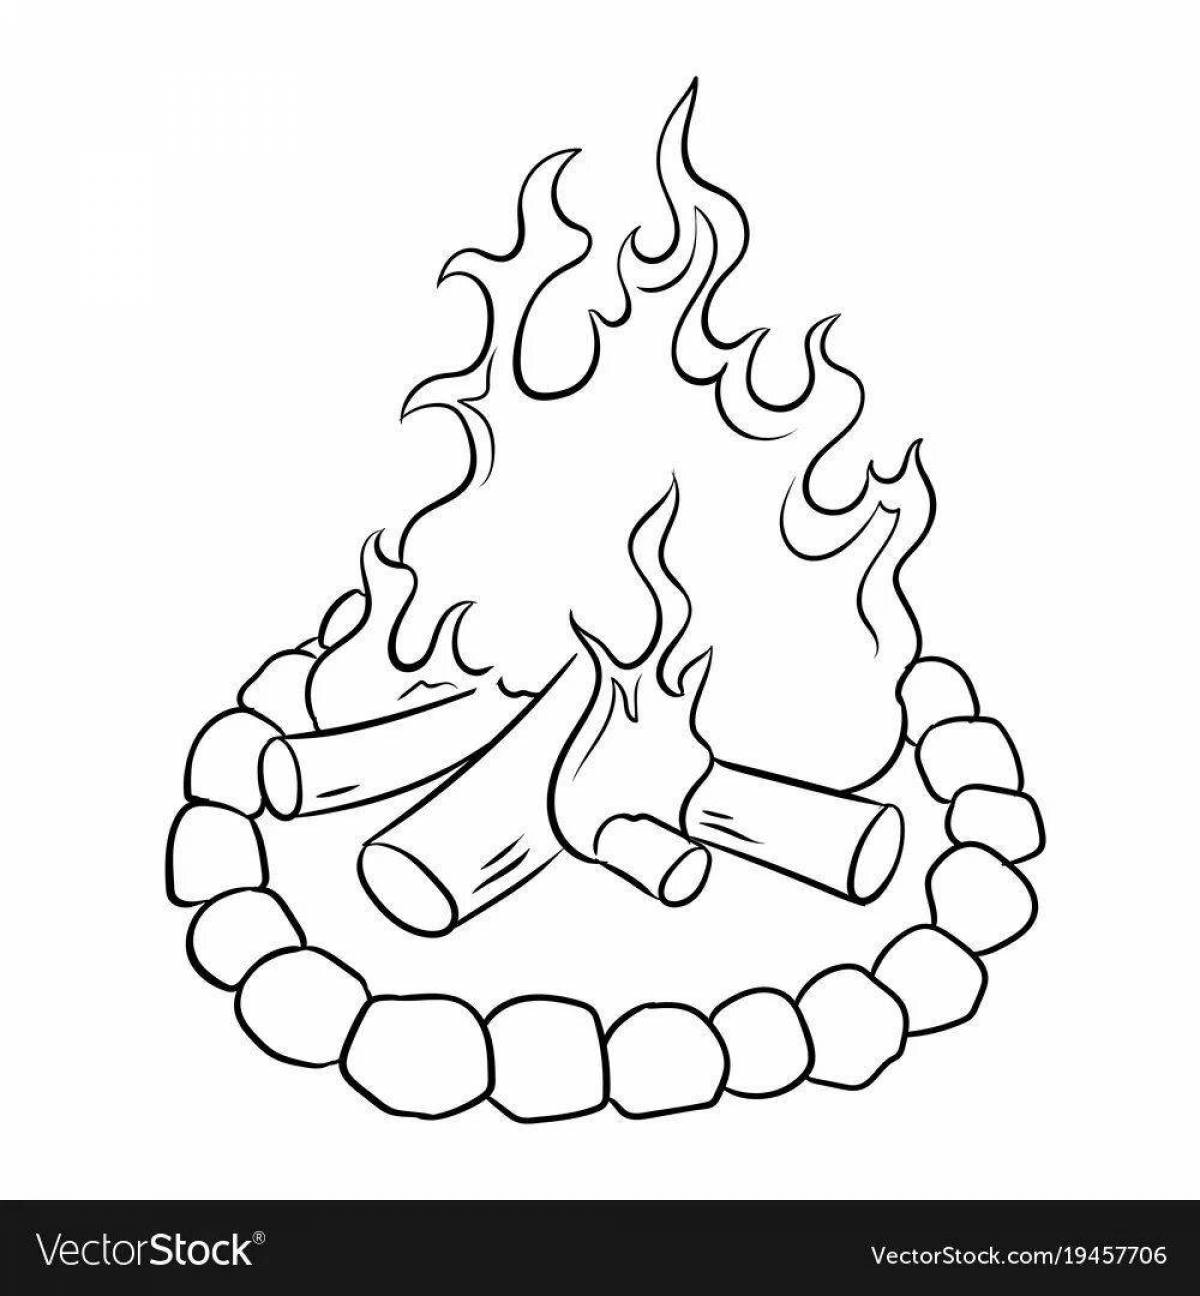 Playful fire coloring page for 3-4 year olds